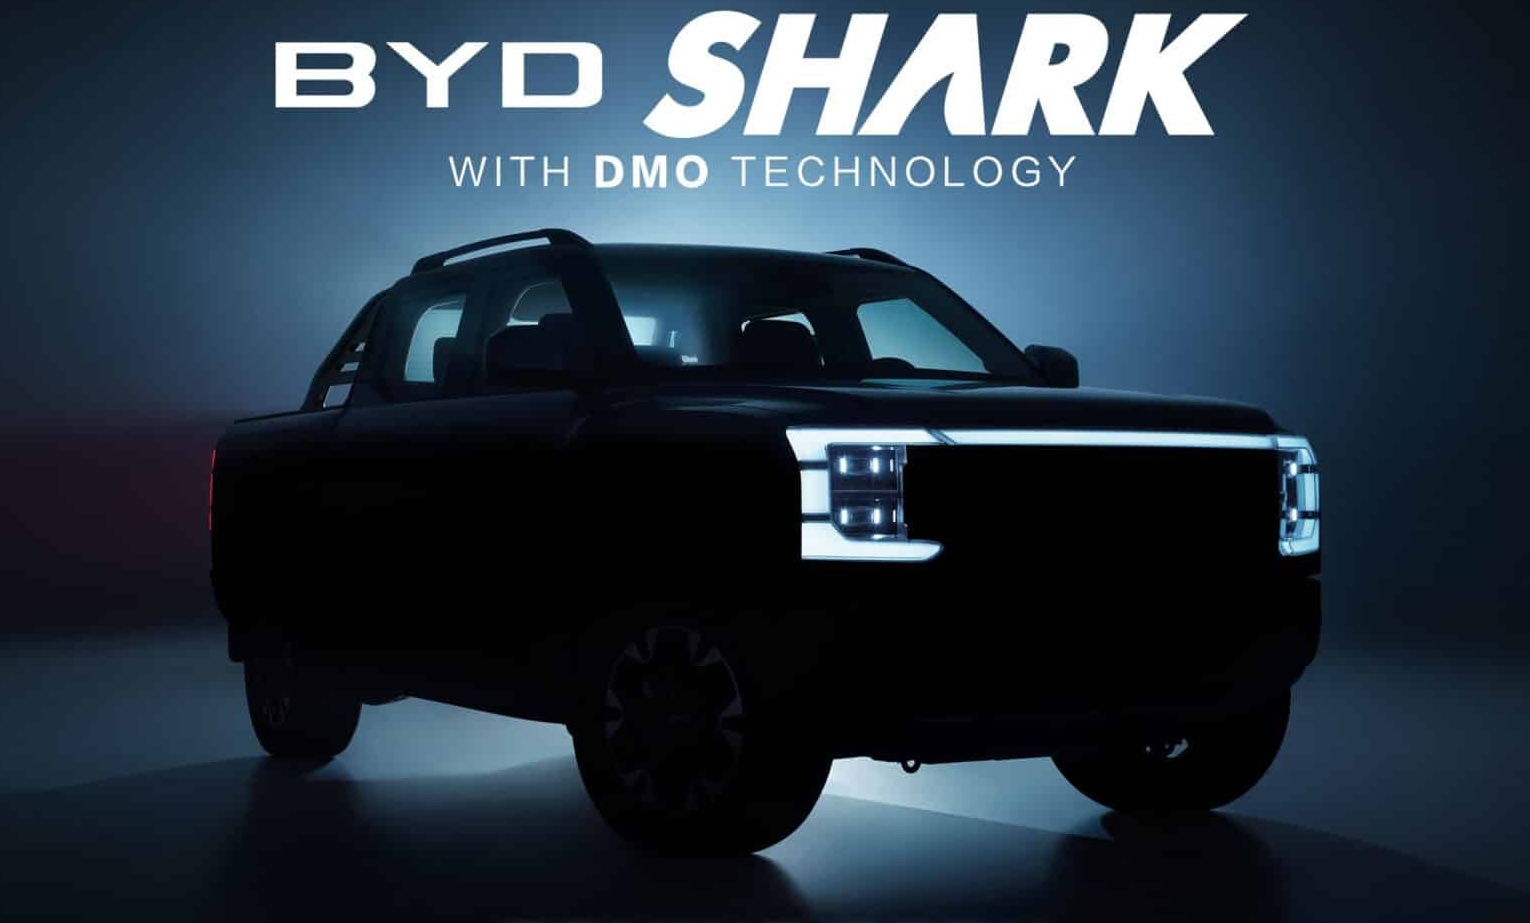 BYD’s “Shark”: The Electrified Pickup Set to Make Waves